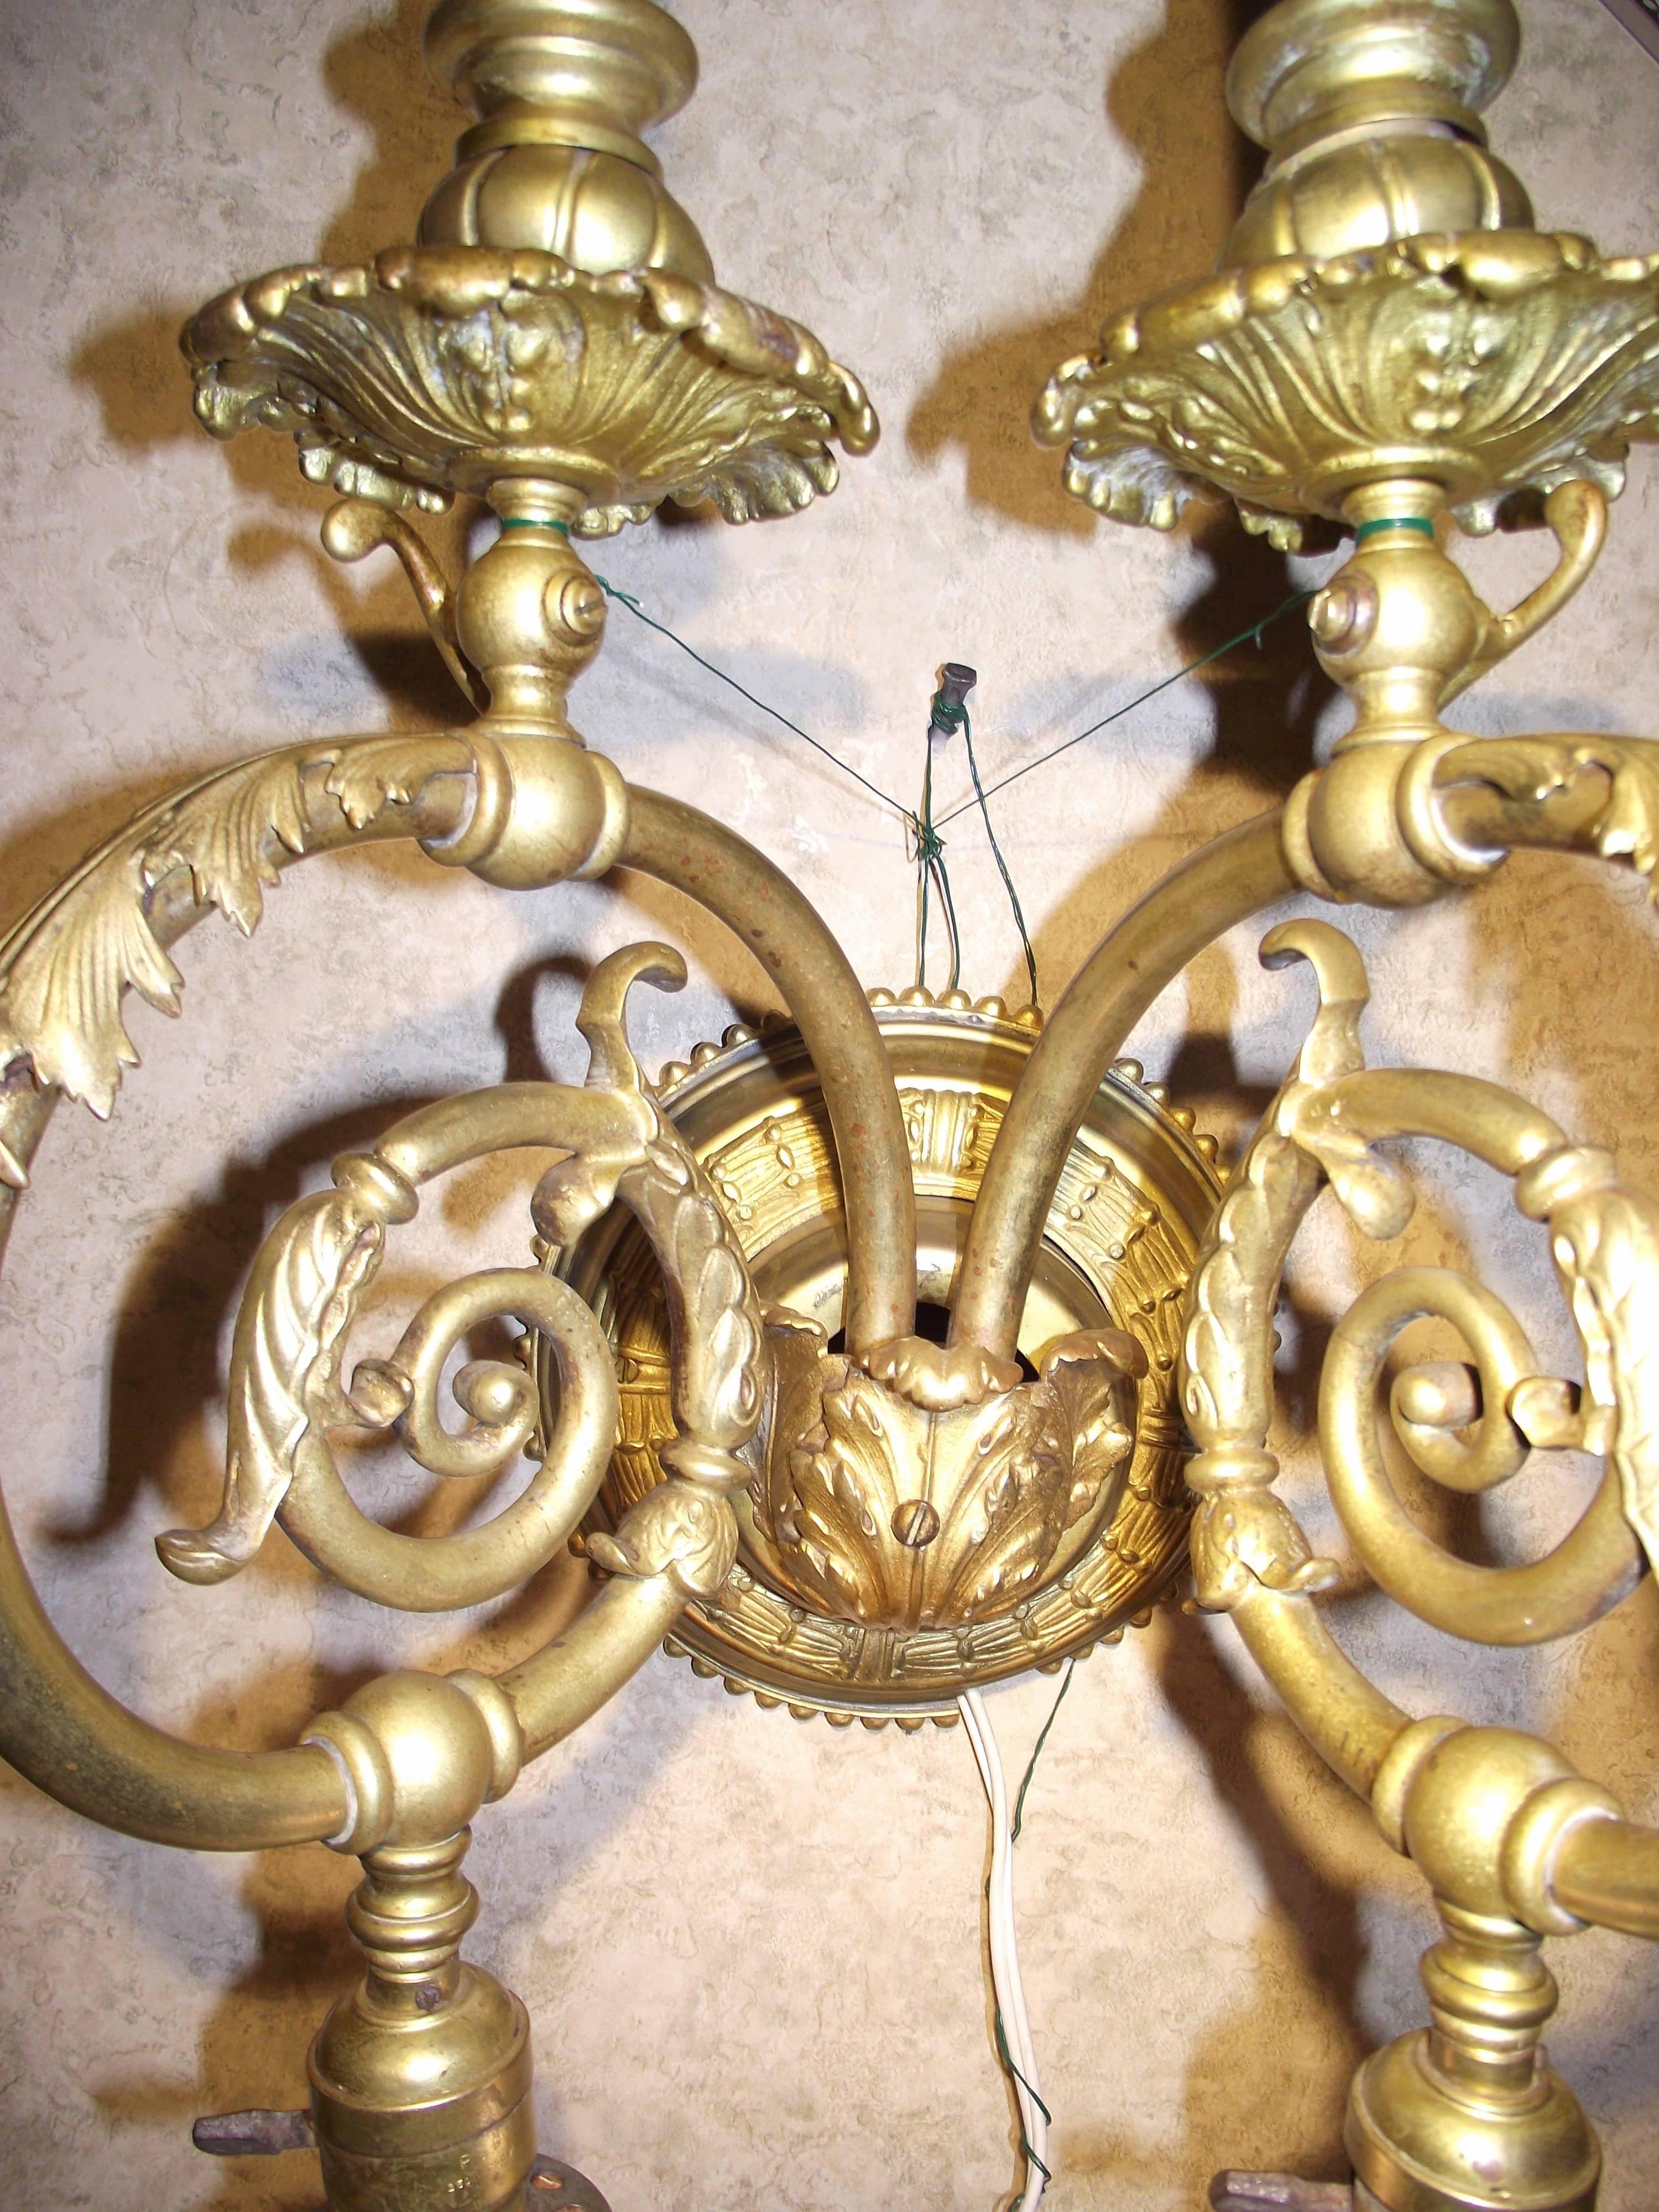 This large-scale original gilded brass gas/electric sconce is a great statement piece. It still has the gas wall connection on the back and if you are lucky enough to still have a working gas connection in your Victorian Home it could be hooked up